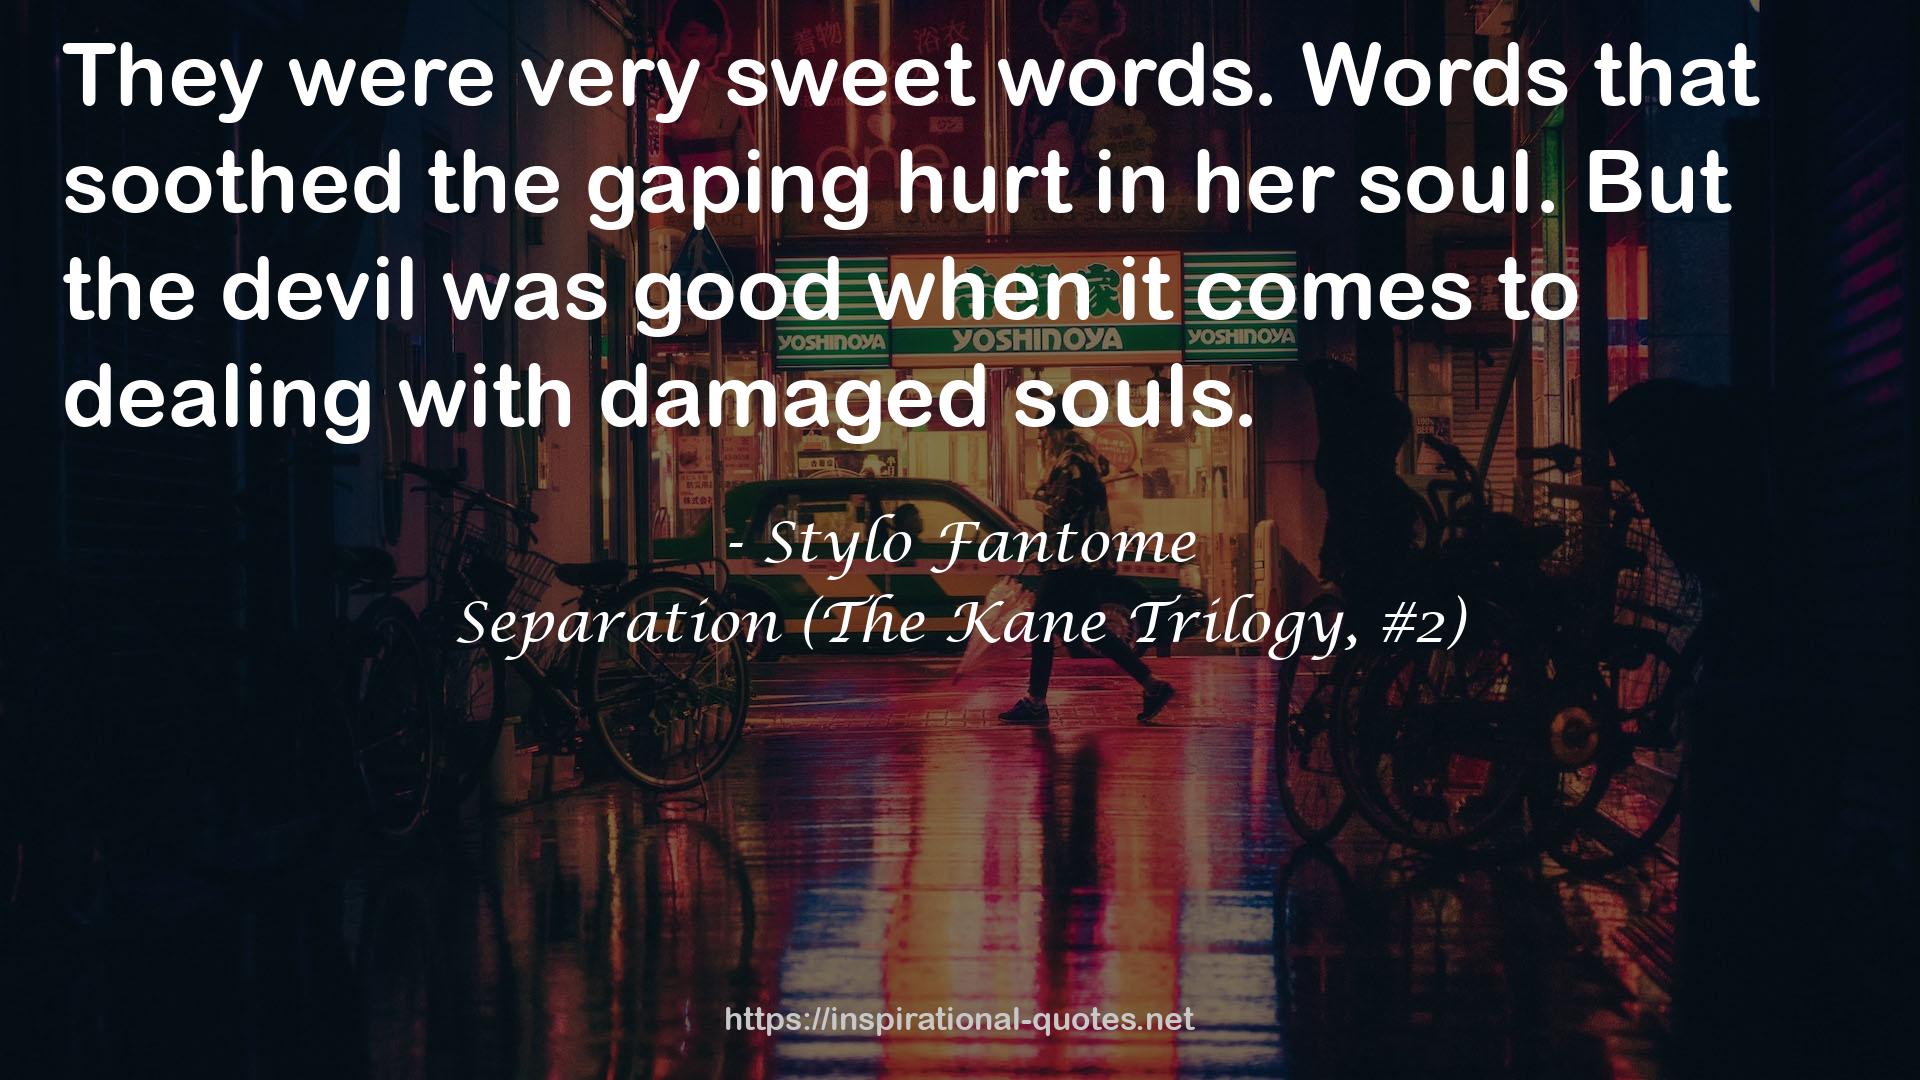 Separation (The Kane Trilogy, #2) QUOTES